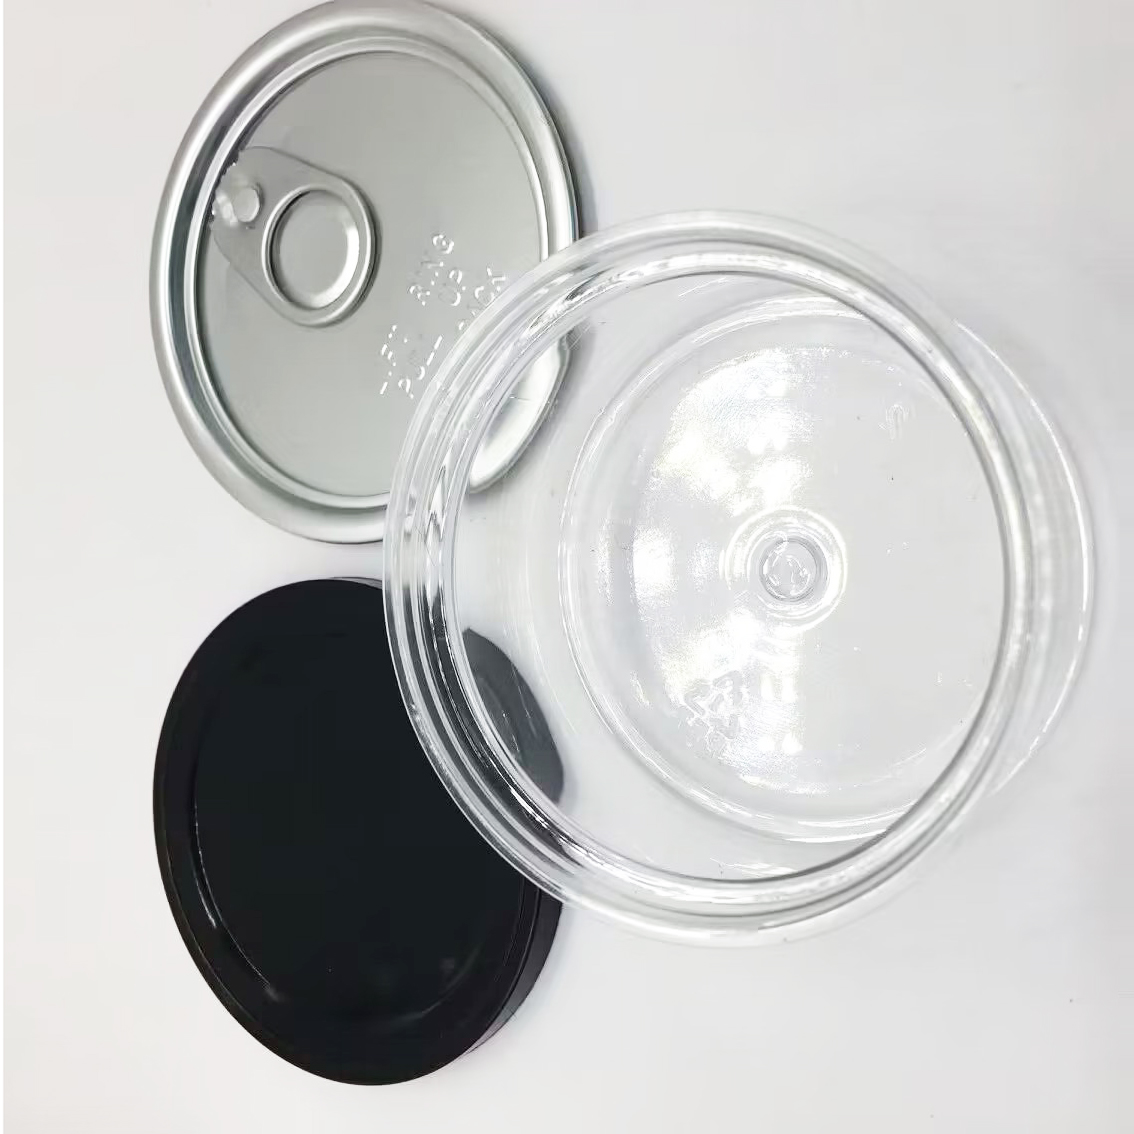 Pressitin Cans Packing Tin Box Metal Round Colorful Small Wedding Candy Box Sweet Cans Tea Container Clear Lid Packaging Bottles Clear Peel Off Lid Black Cover